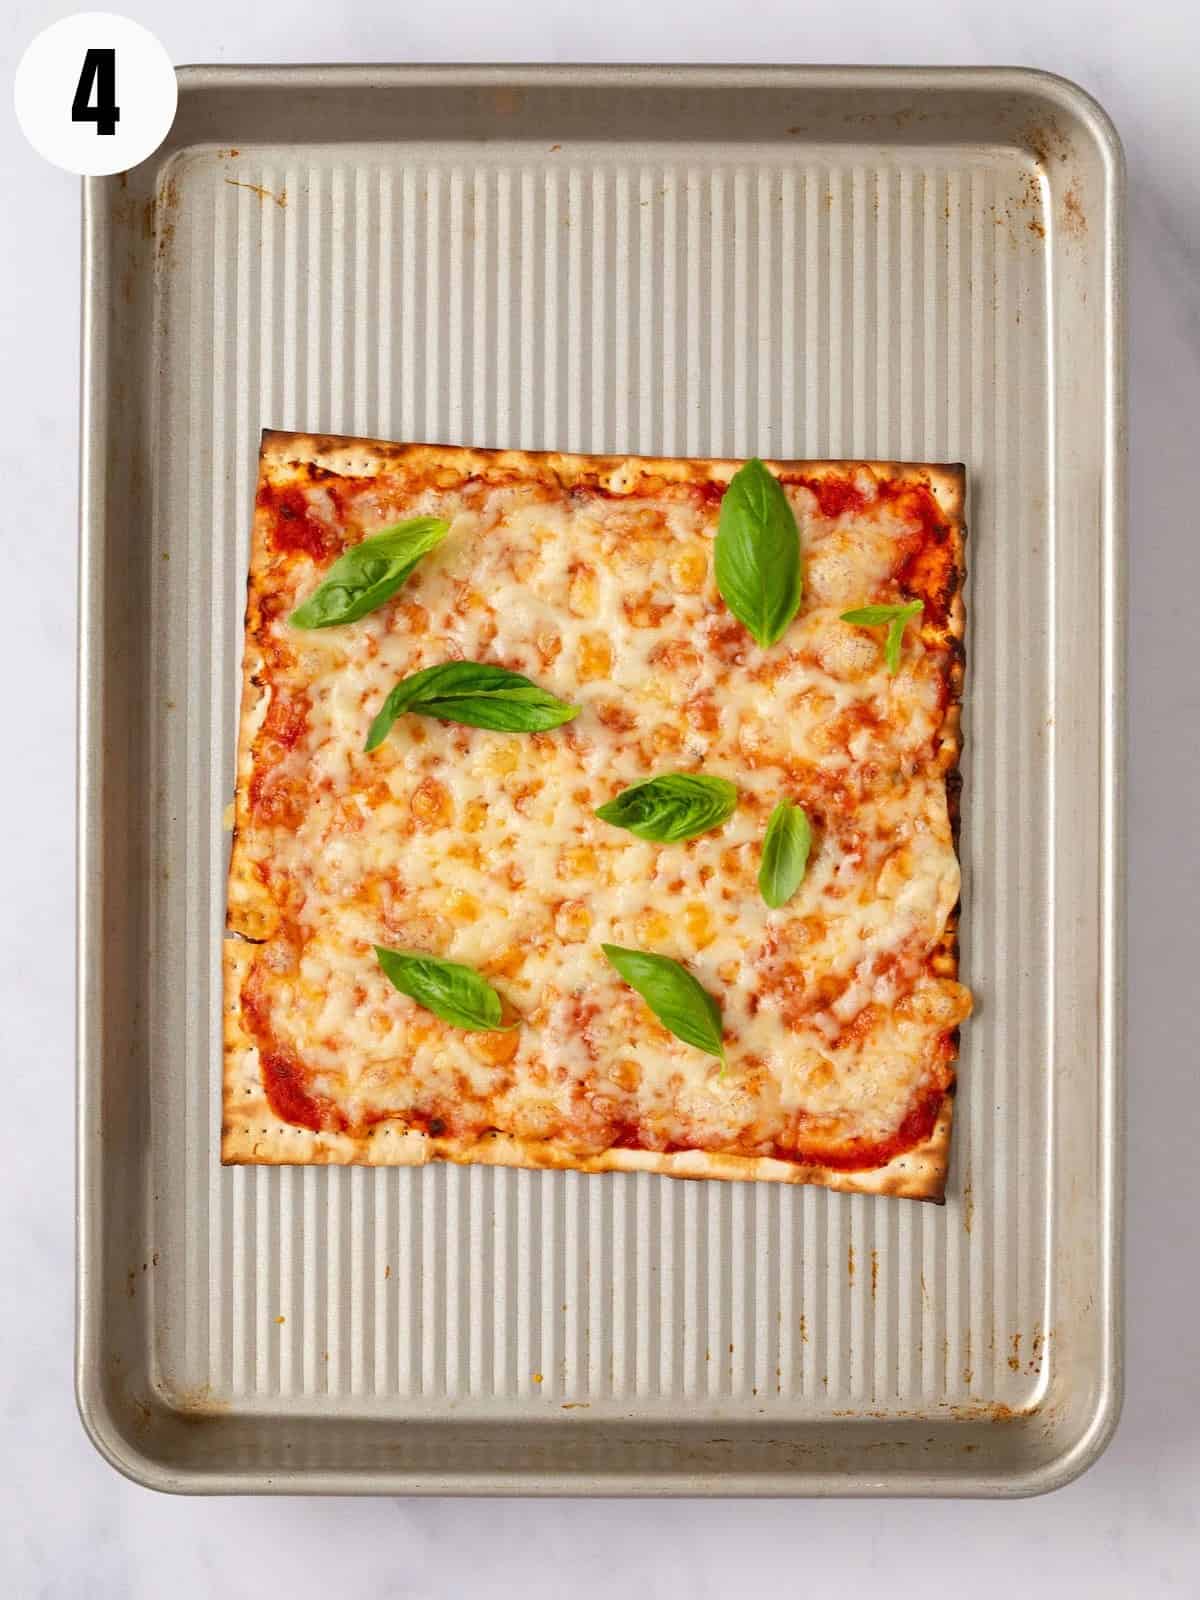 Matzo baked with sauce, mozzarella, and topped with fresh basil.